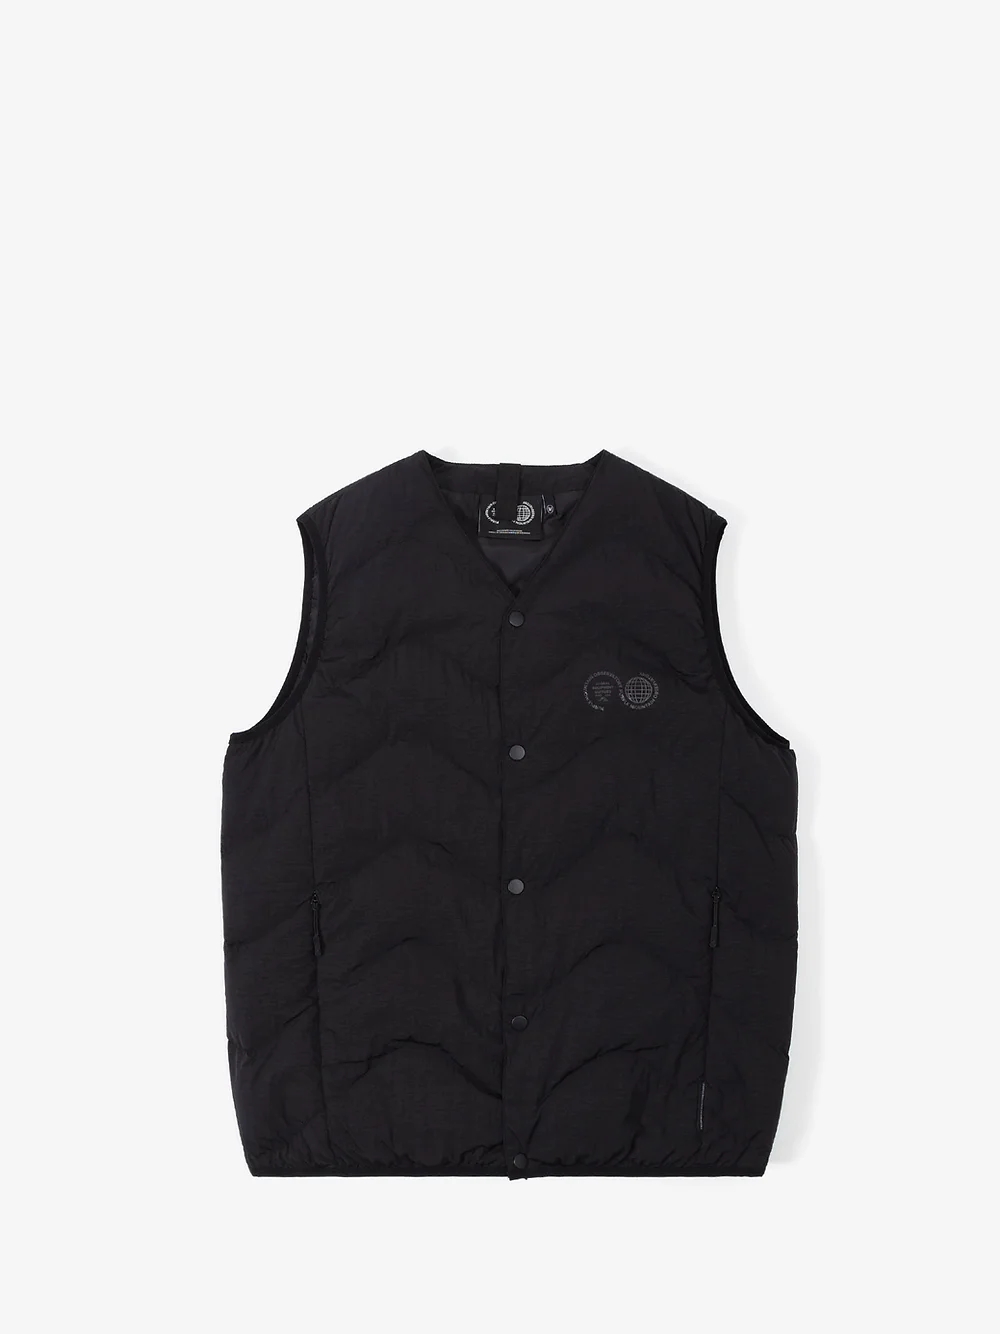 Featured image for “WAVE QUILTED VEST BLACK”